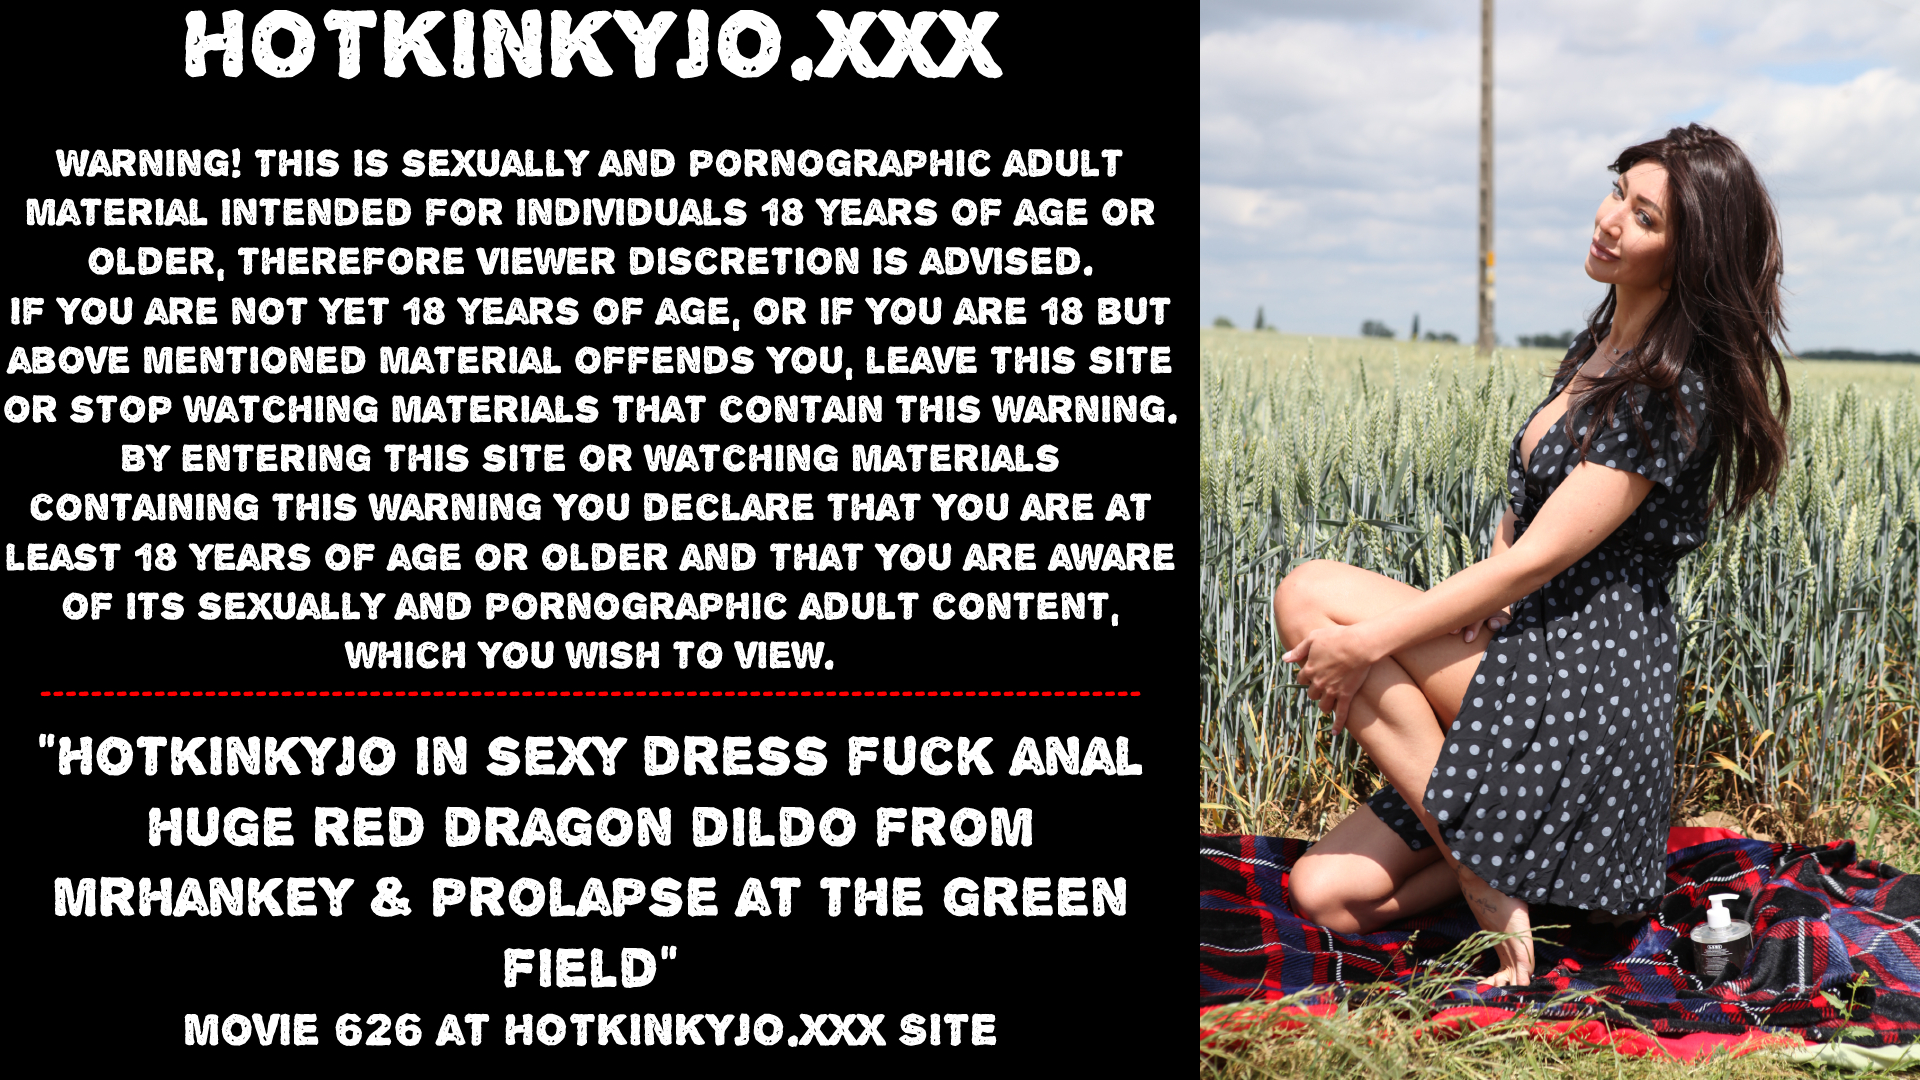 HKJ dildo from mrhankey & prolapse at the green field